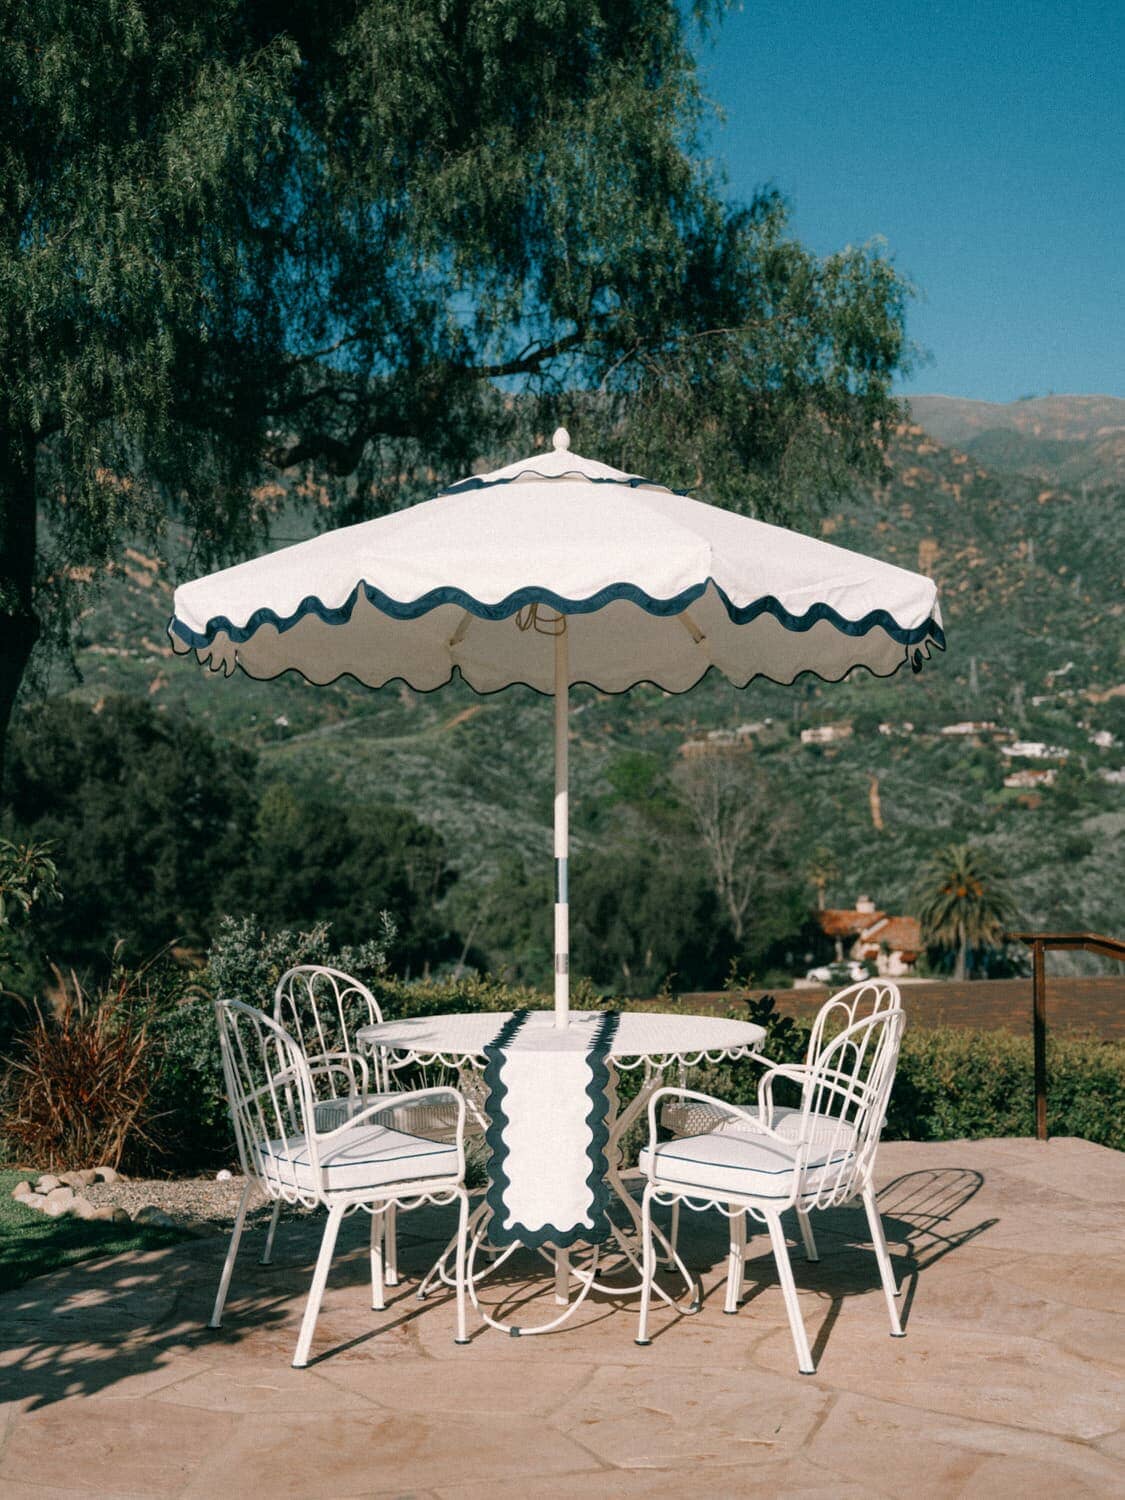 White riviera market umbrella with an alfresco dining table and chairs on a garden patio